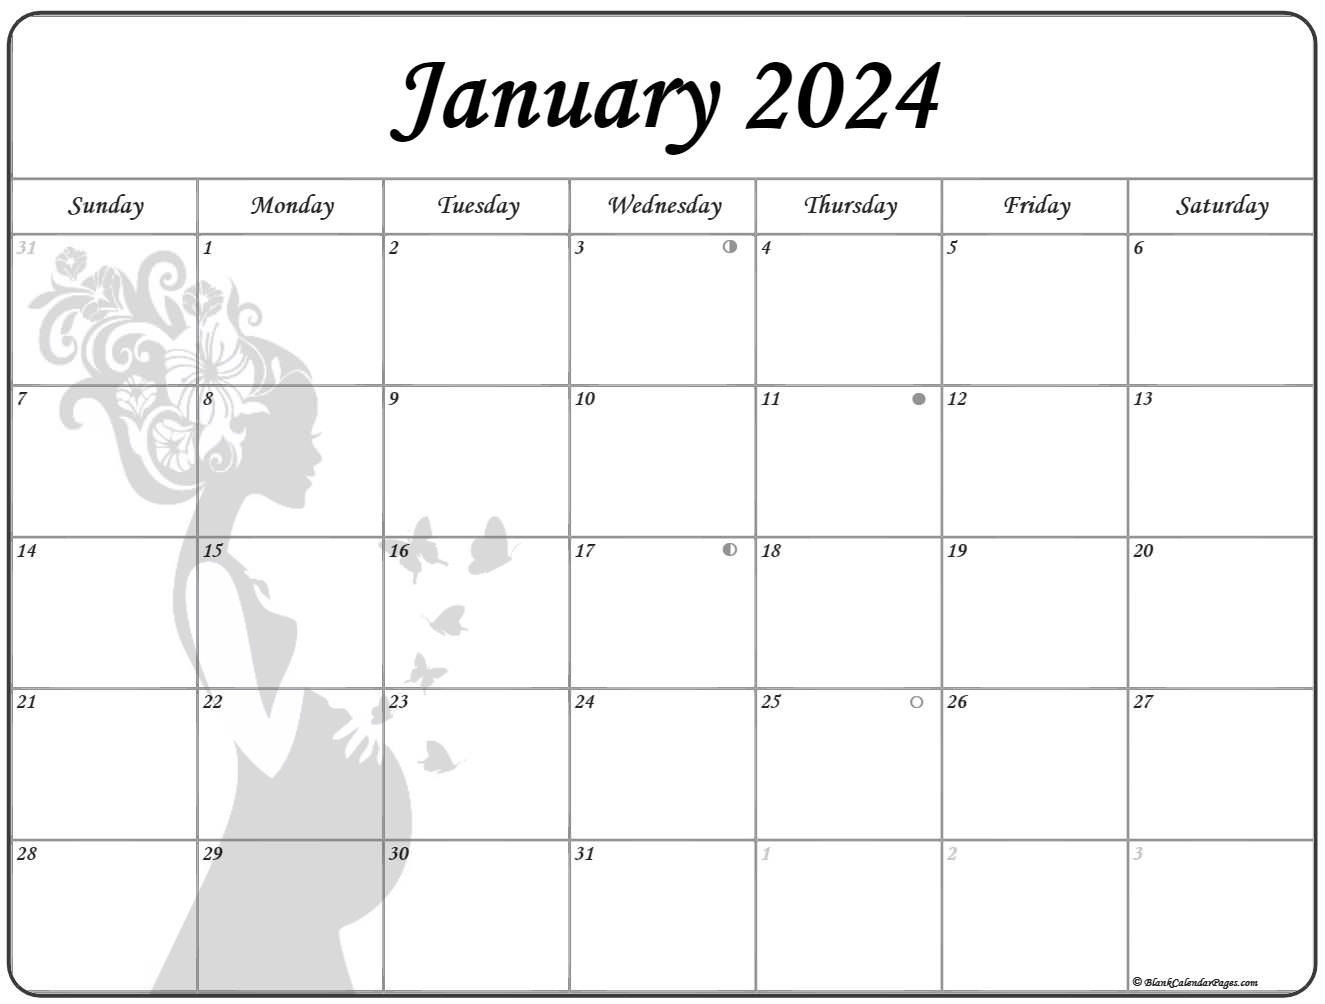 Collection Of January 2021 Photo Calendars With Image Filters